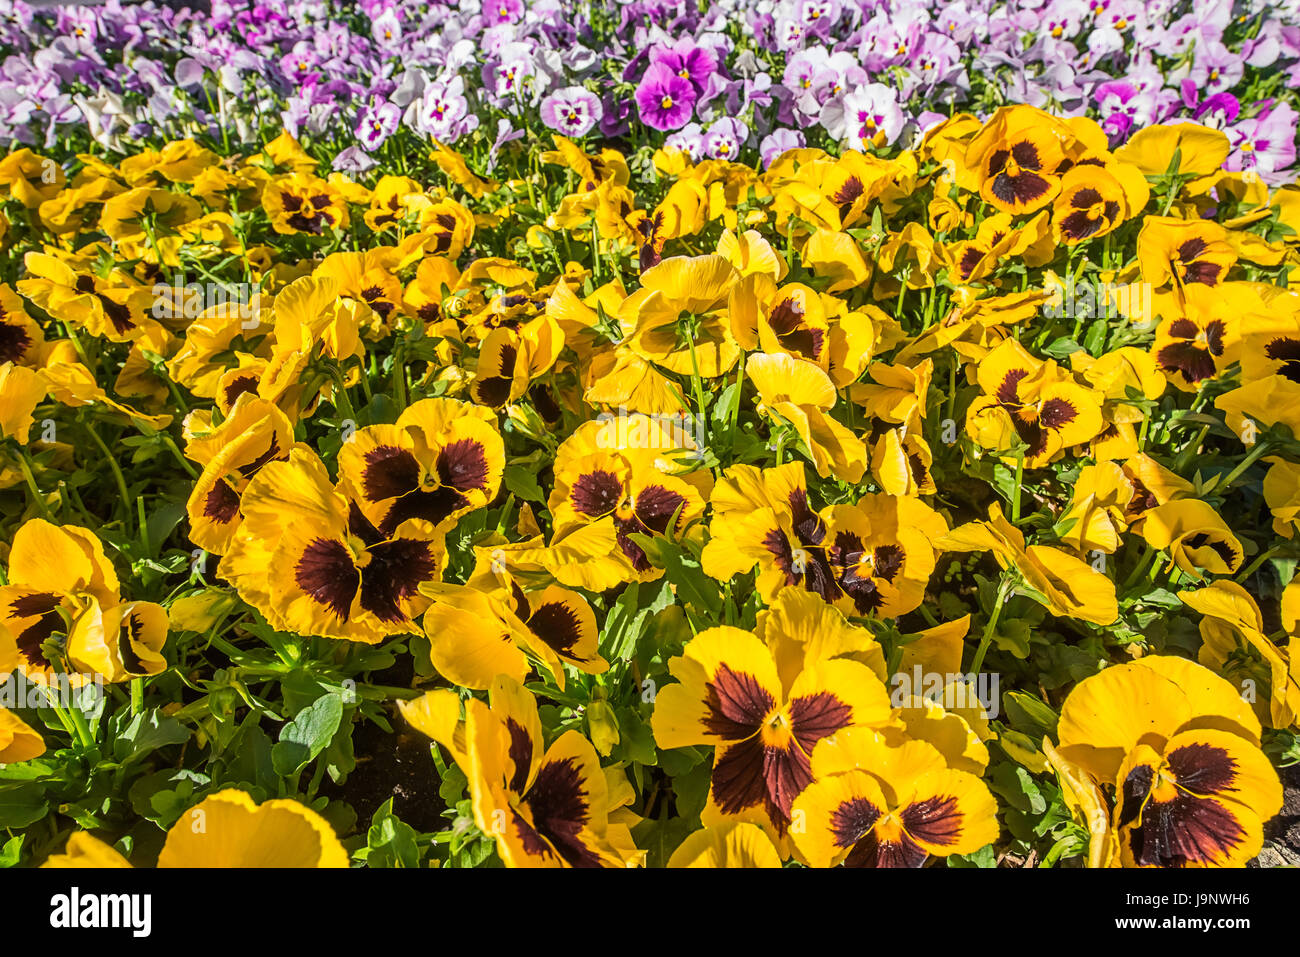 Closeup of colourful horizontal flowerbed made of pink and yellow pansies in sunshine with unfocused background Stock Photo